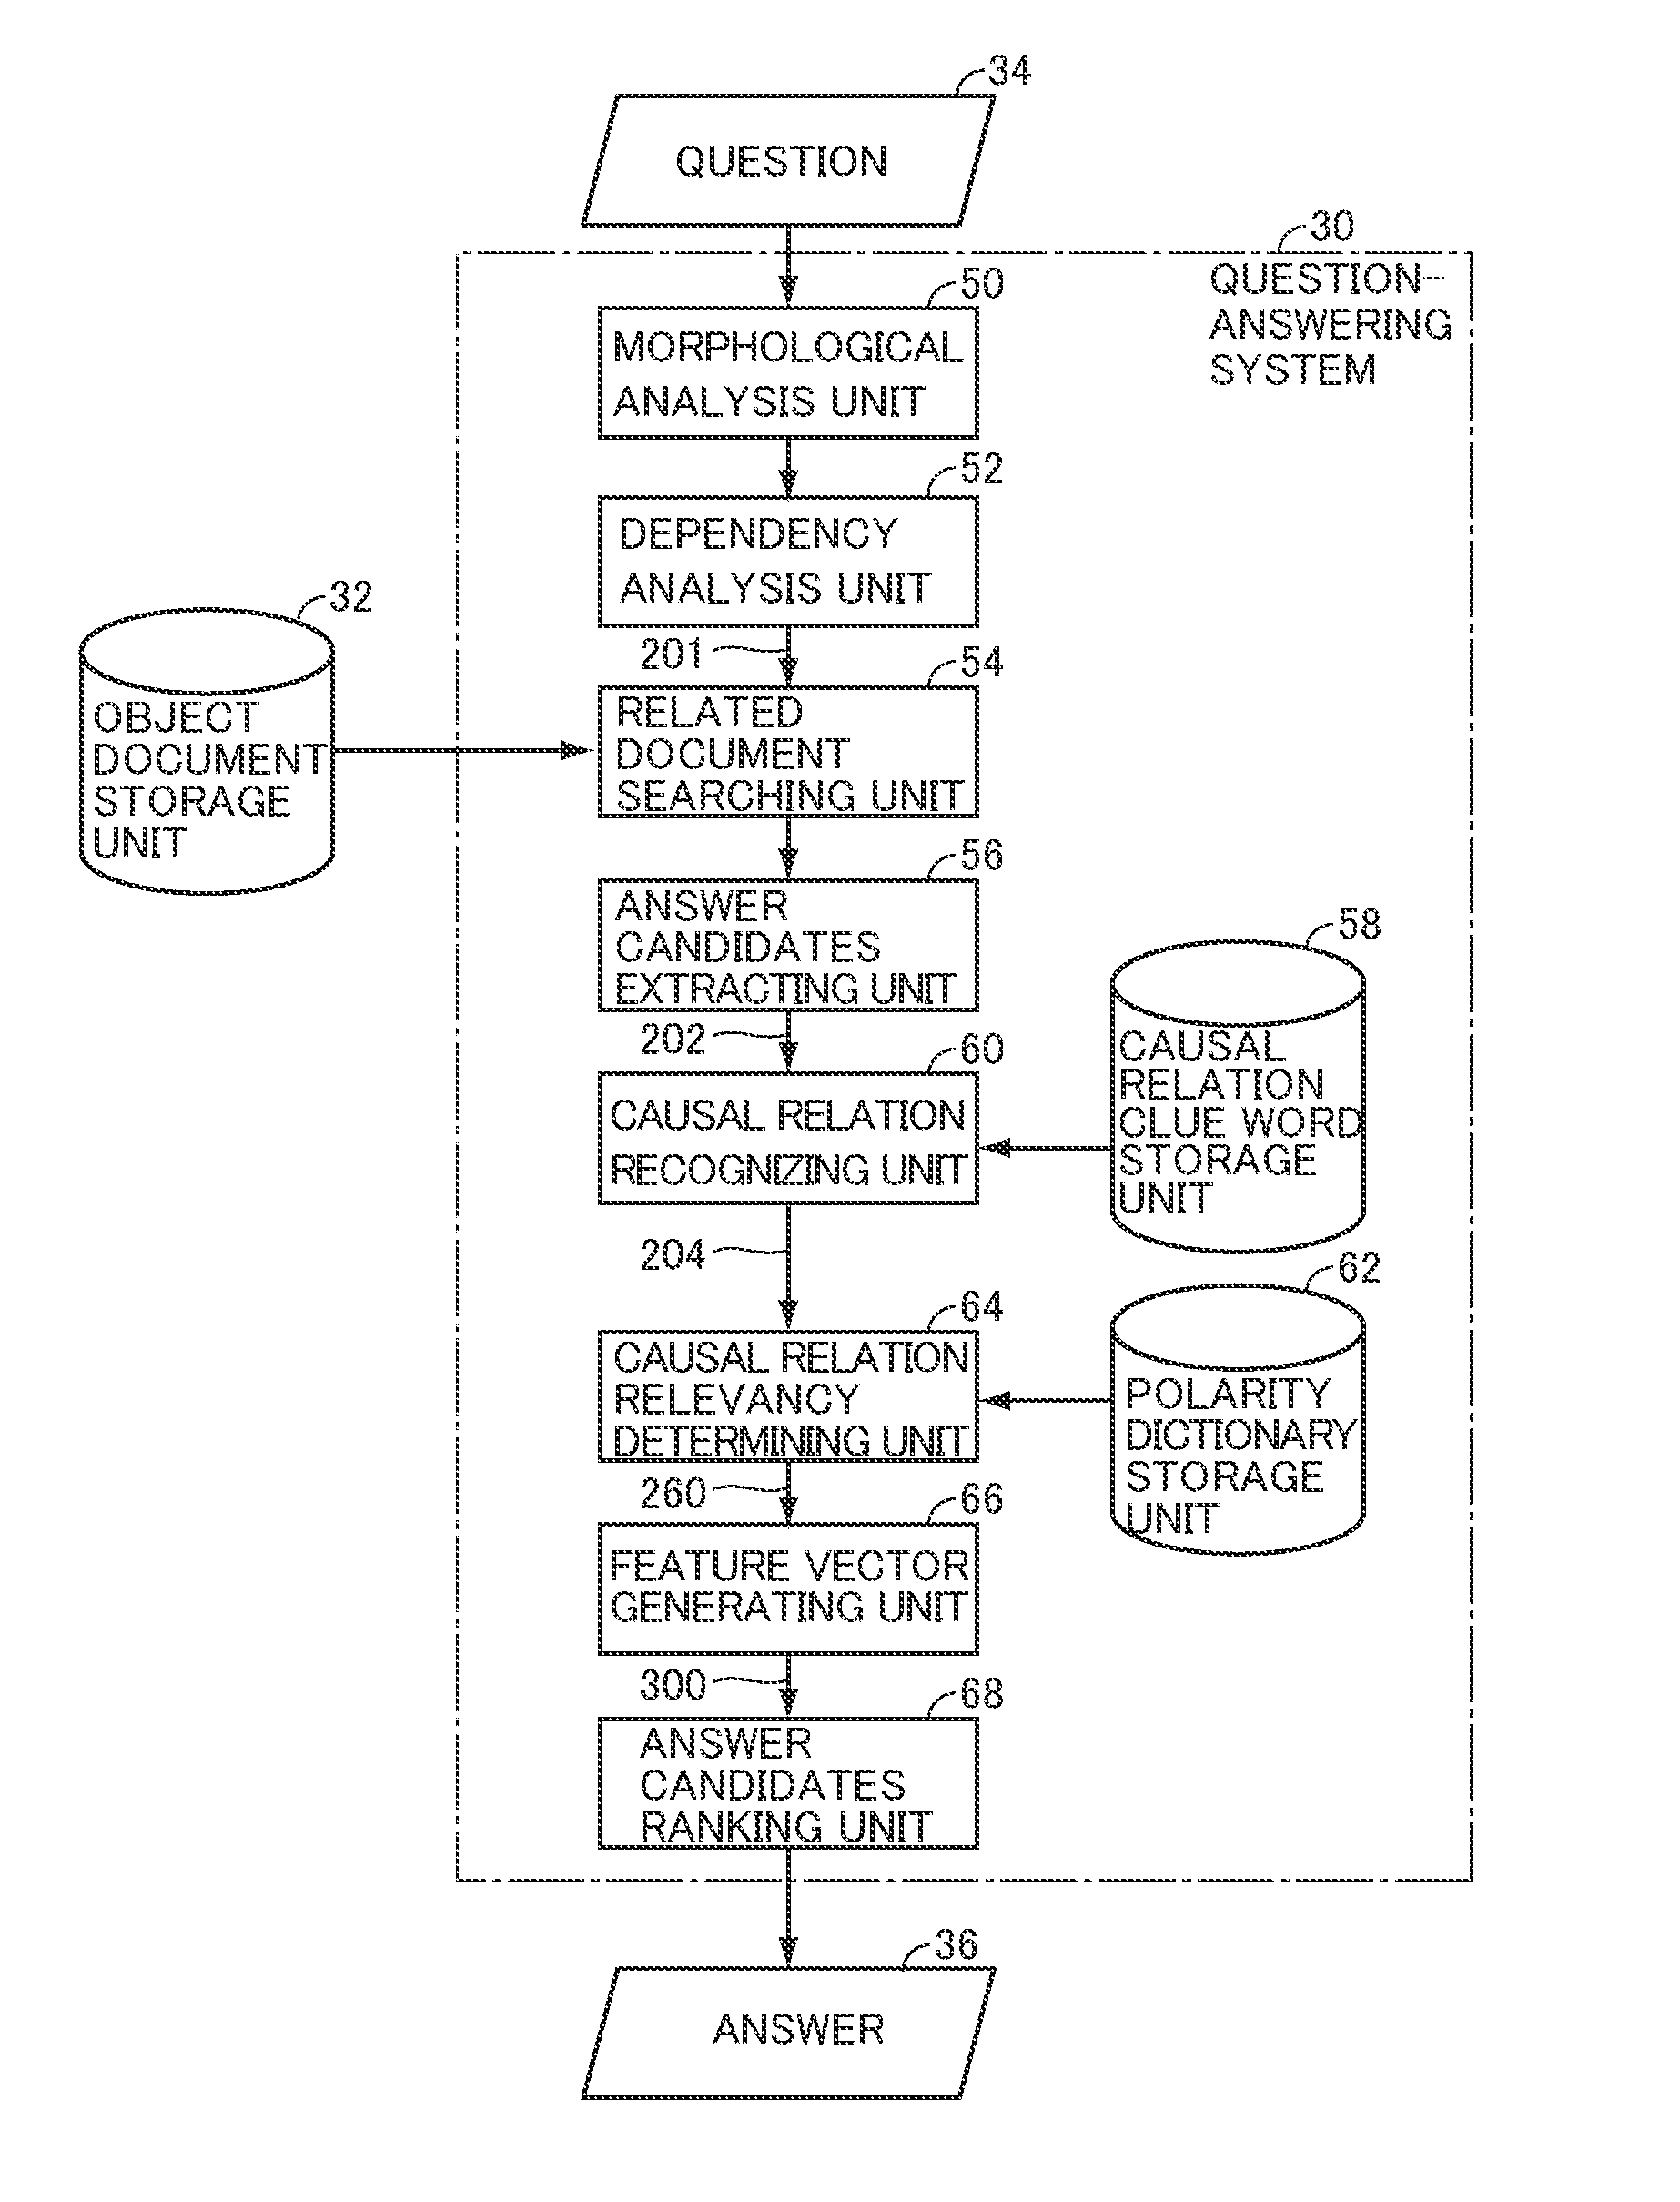 Non-factoid question-answering system and method